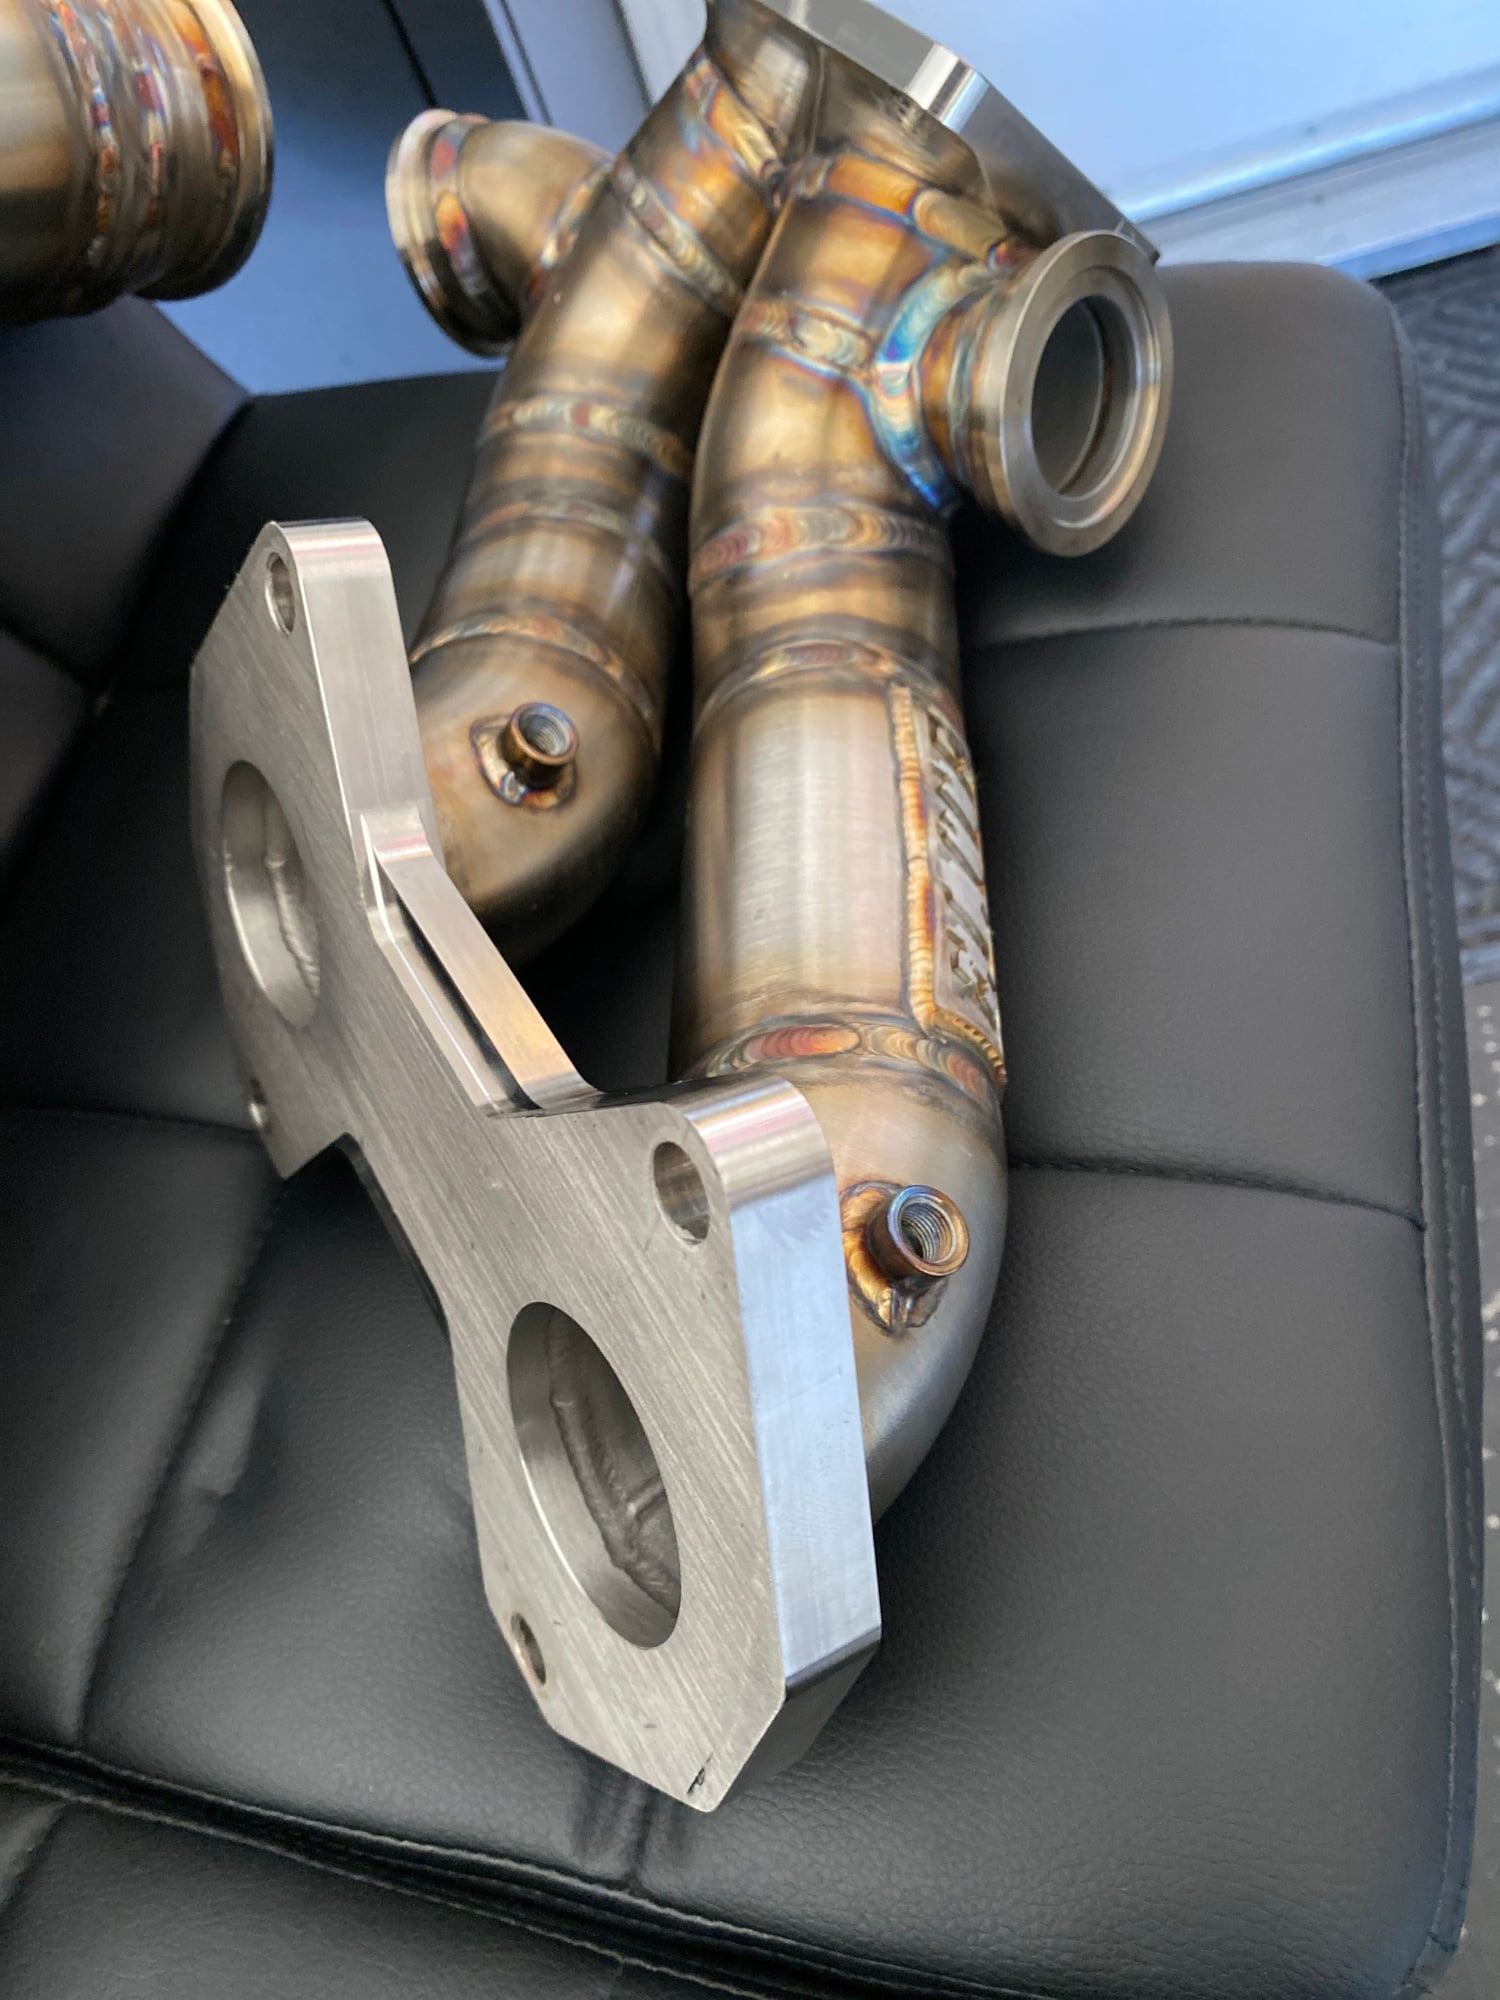 Engine - Power Adders - “Elite” Exhaust manifold/3.5” down pipe and wastegate tubes - New - 1993 to 2002 Mazda RX-7 - Rio Vista, CA 94571, United States